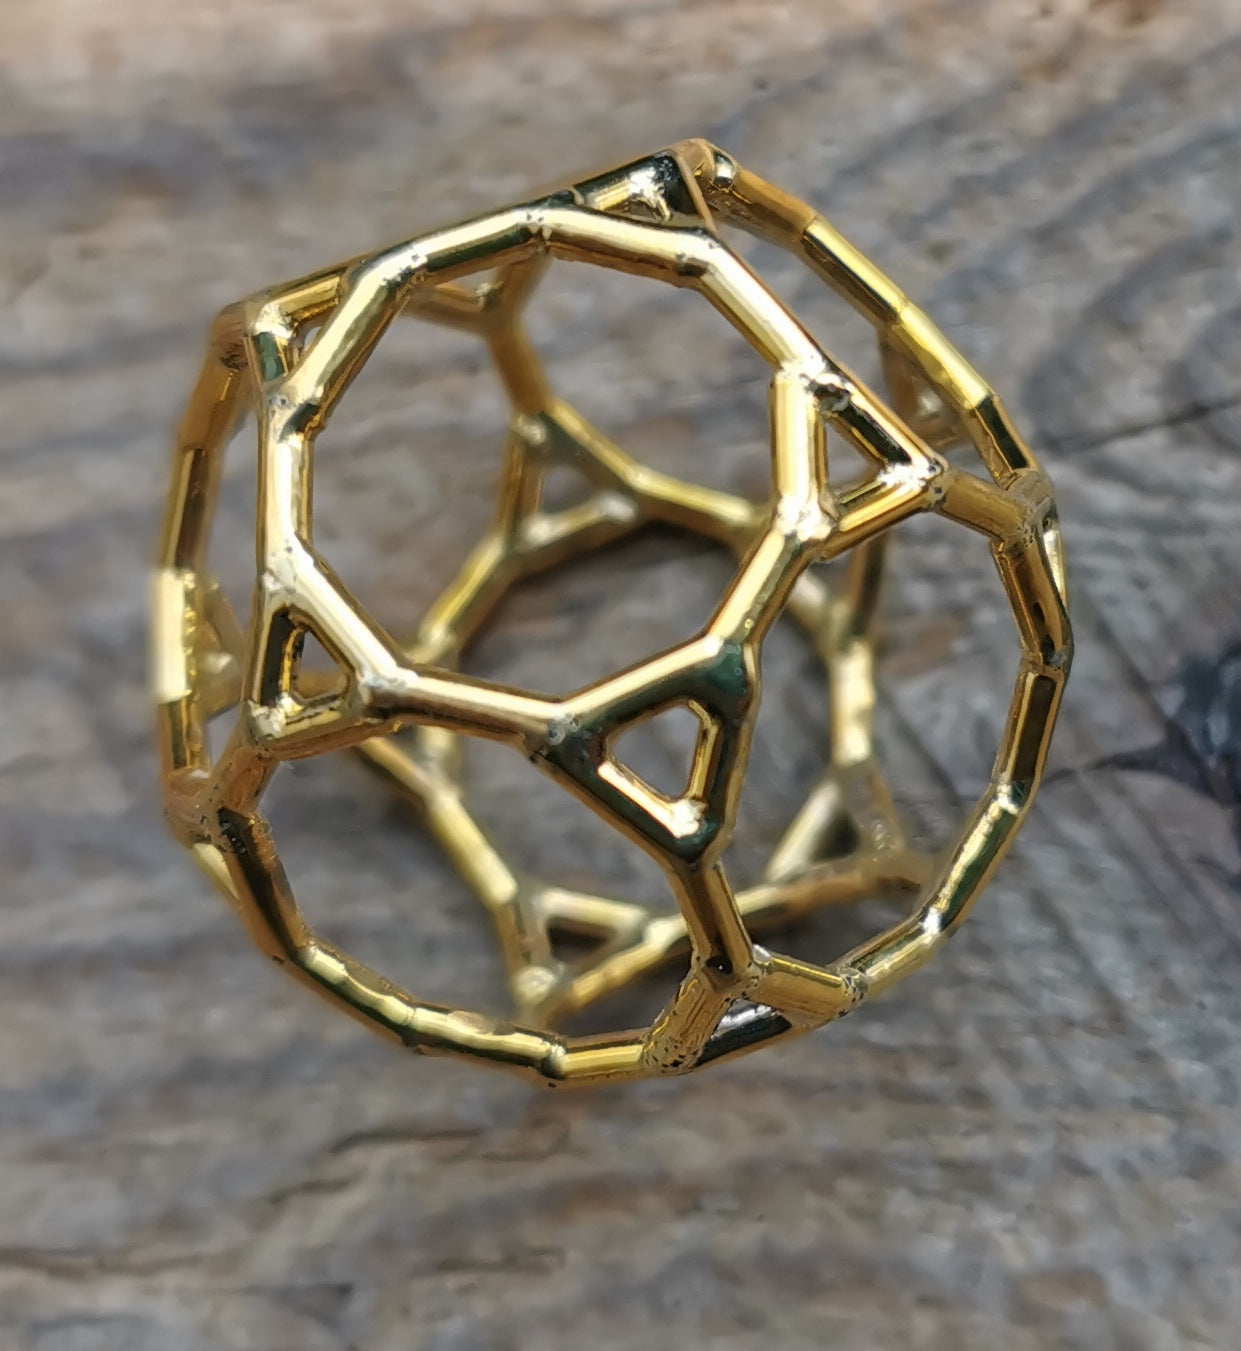 Ref.SZ0108 - Iconic Solar Sphere / Truncated Dodecahedron